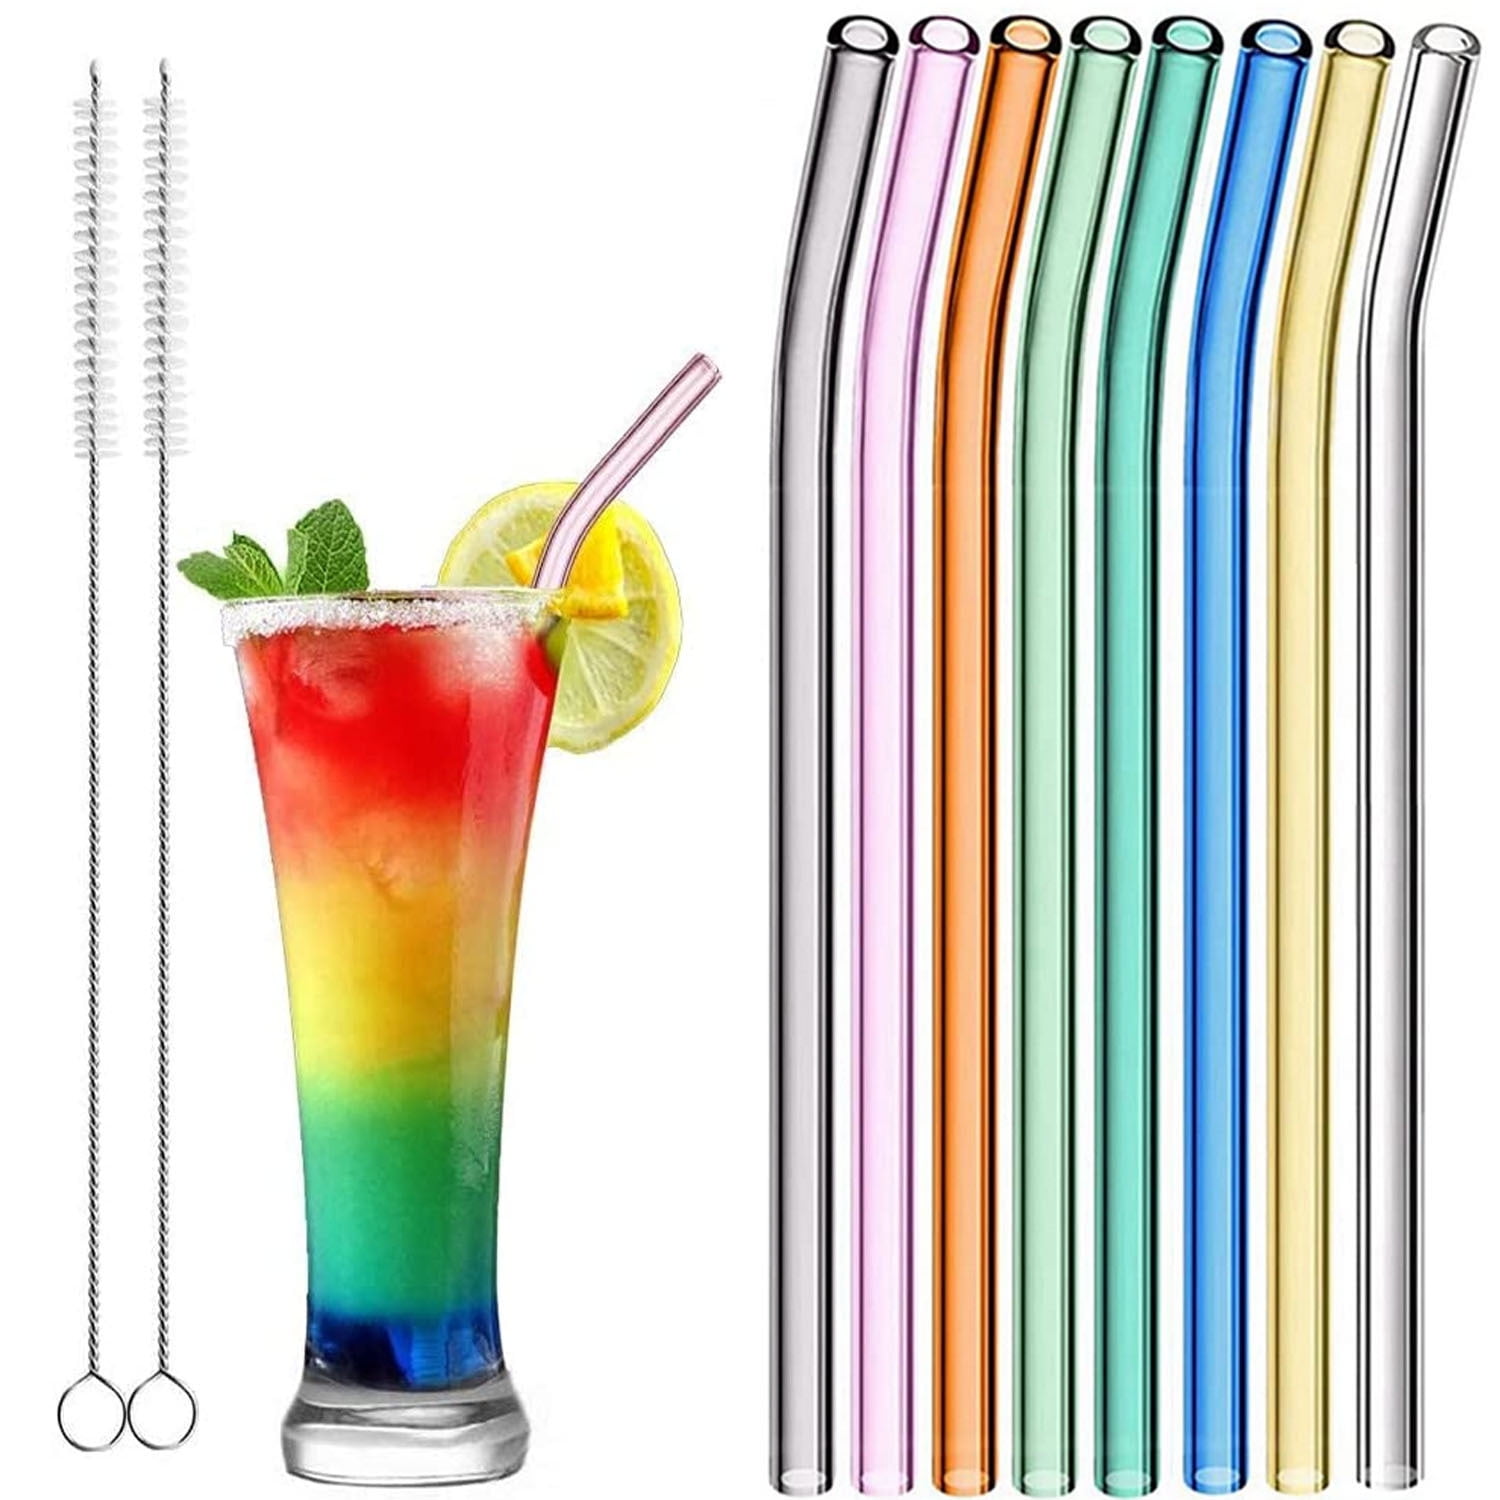 4 Straight Smoothie Straws 8mm - Copper Finish – World of Your Choice